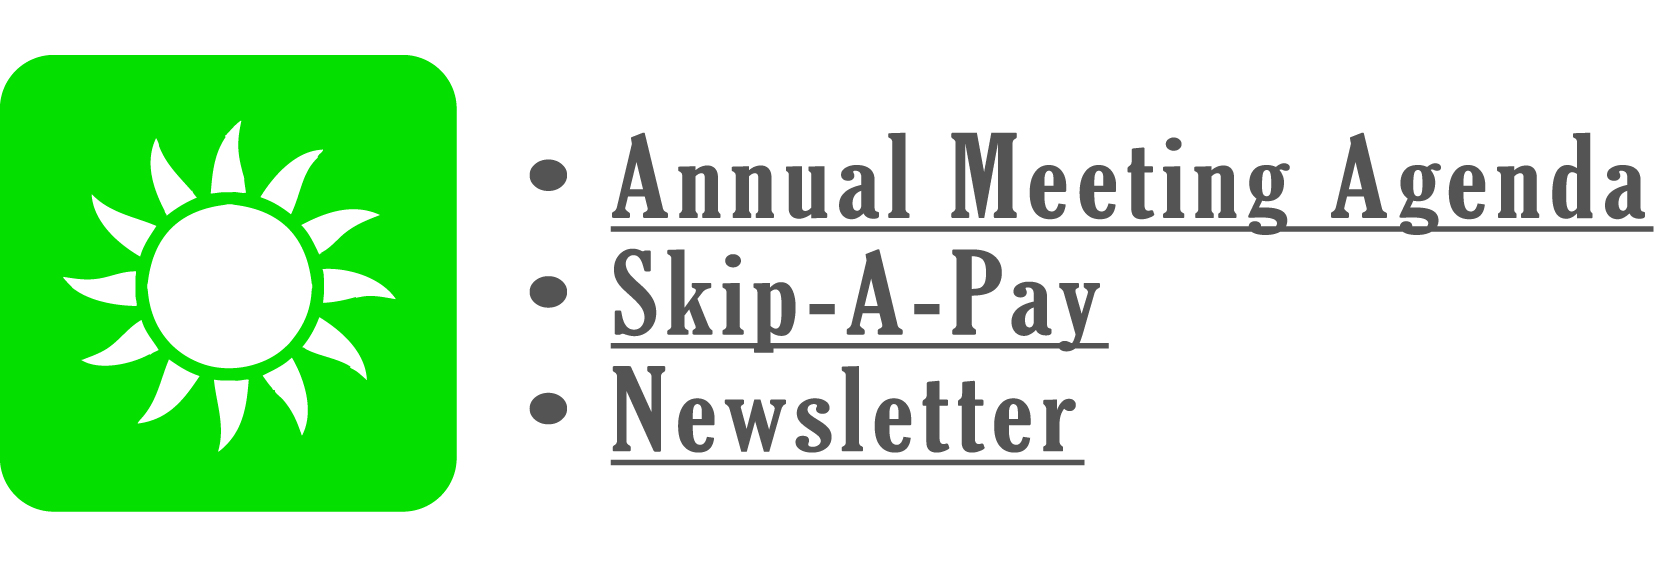 Taxes, Skip a payment and Newsletter